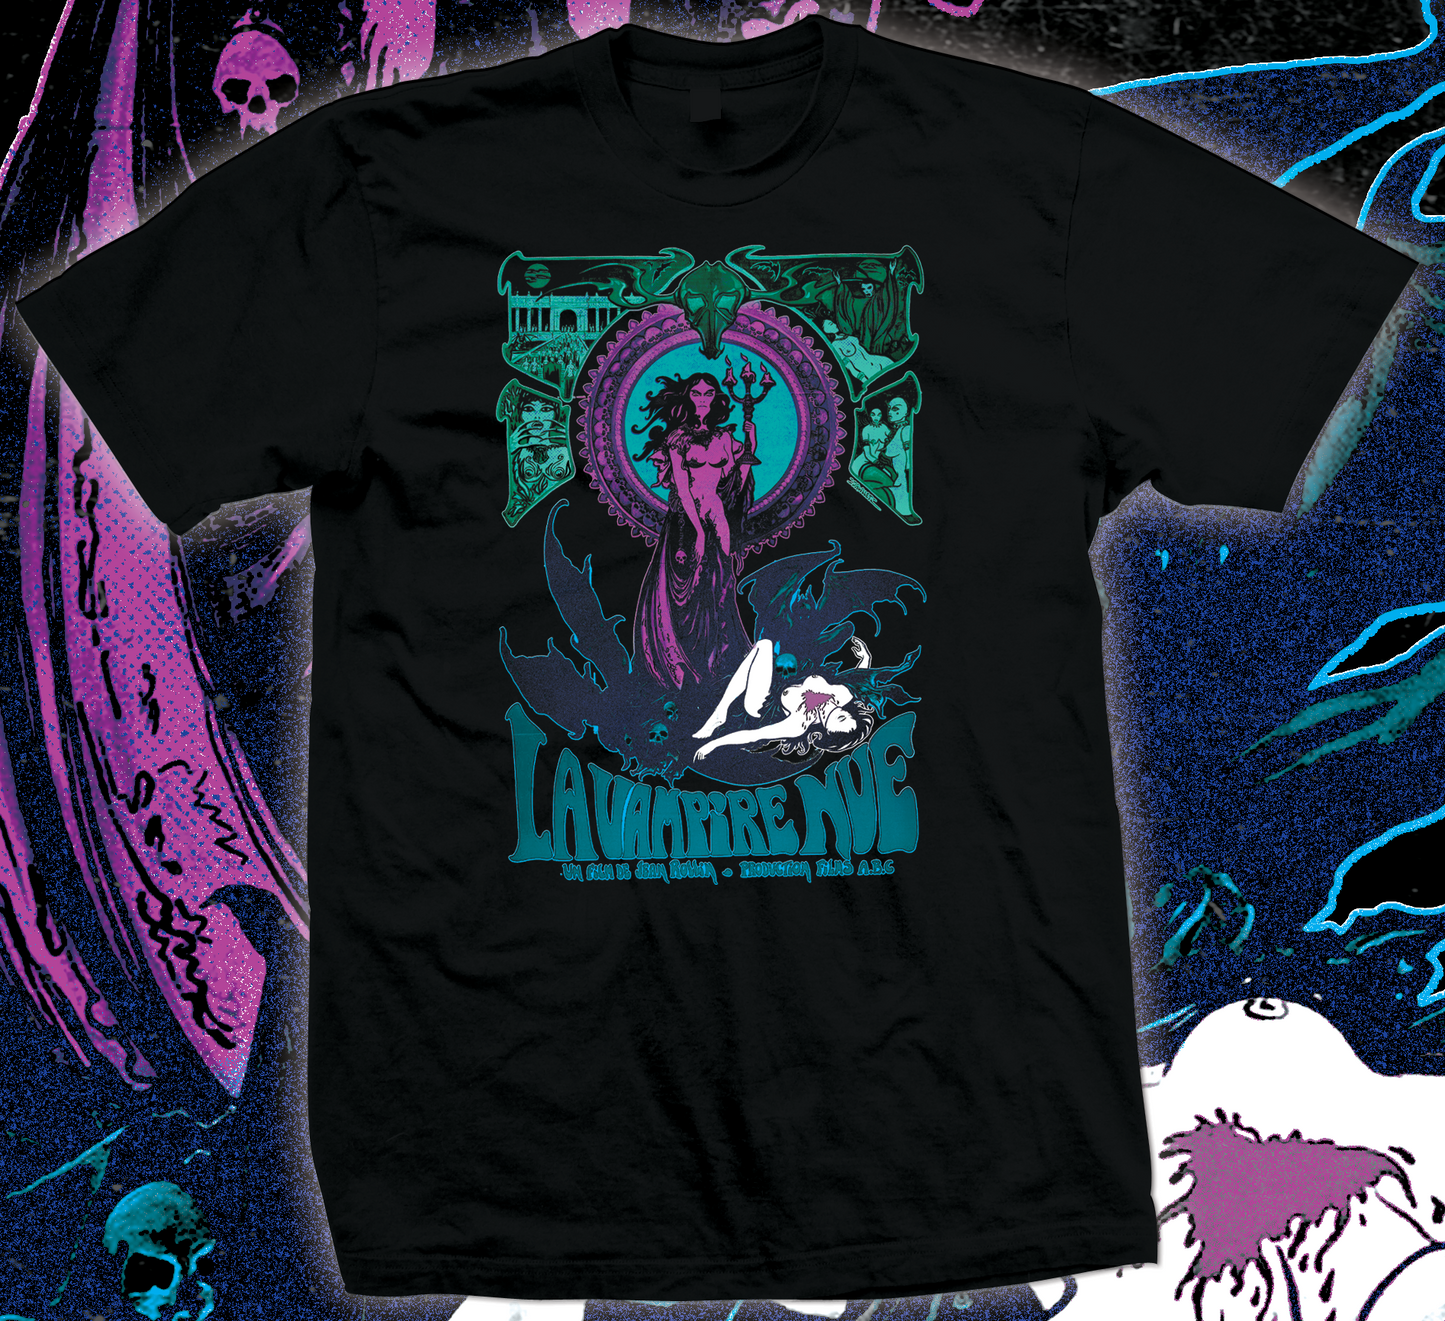 "LA VAMPIRE NUE" KnifeSlitsWater x Thee Crooked Hand Collab Series